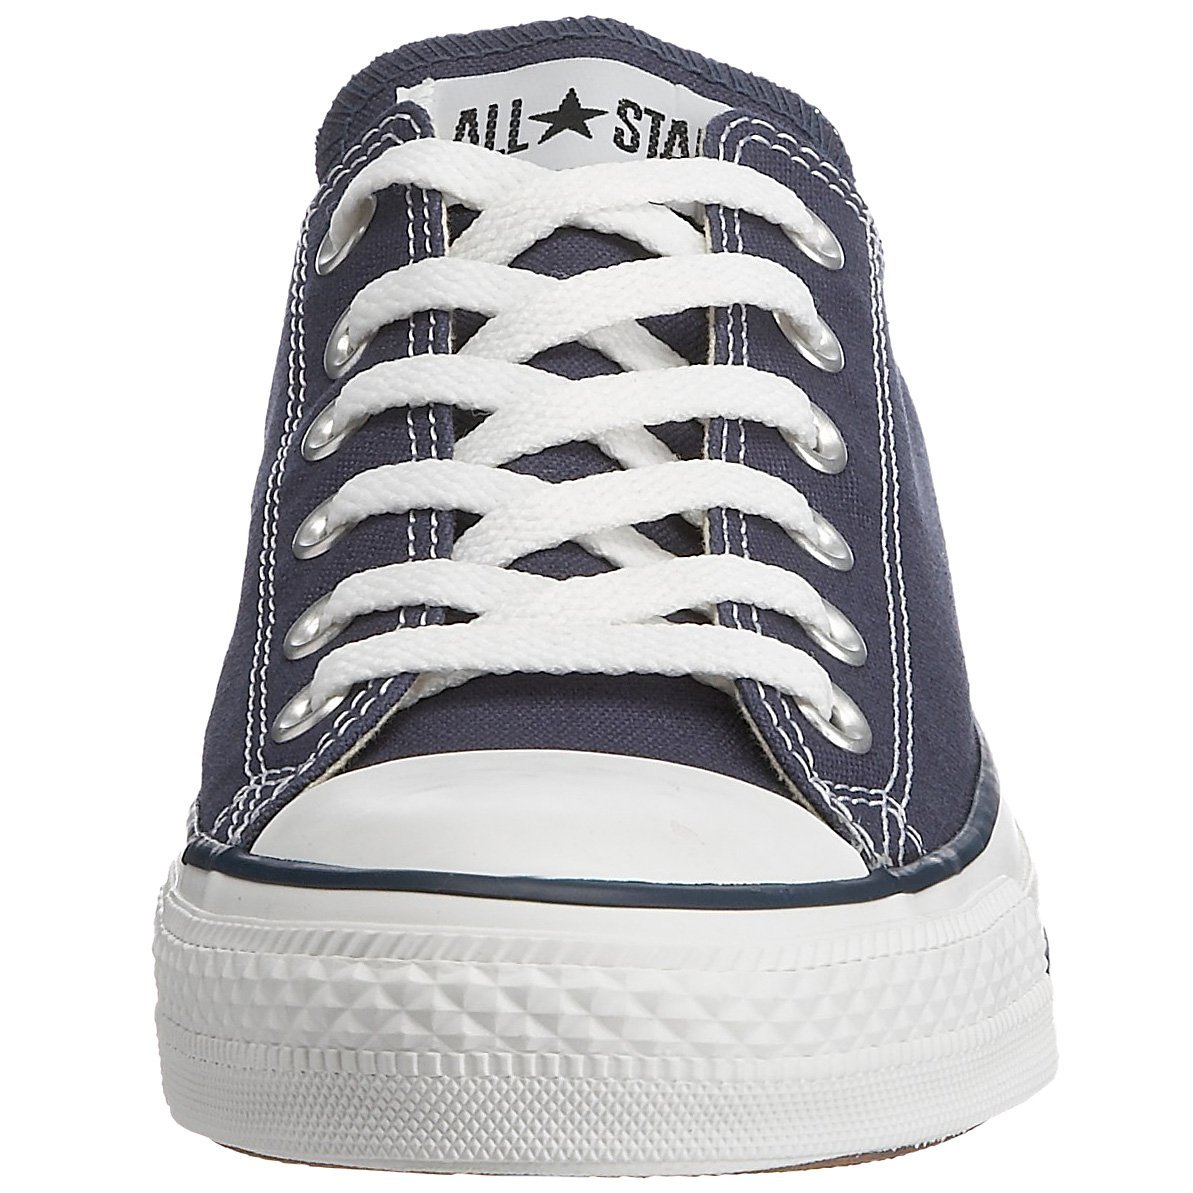 Converse Unisex Chuck low Fashion-Sneakers - image 2 of 7